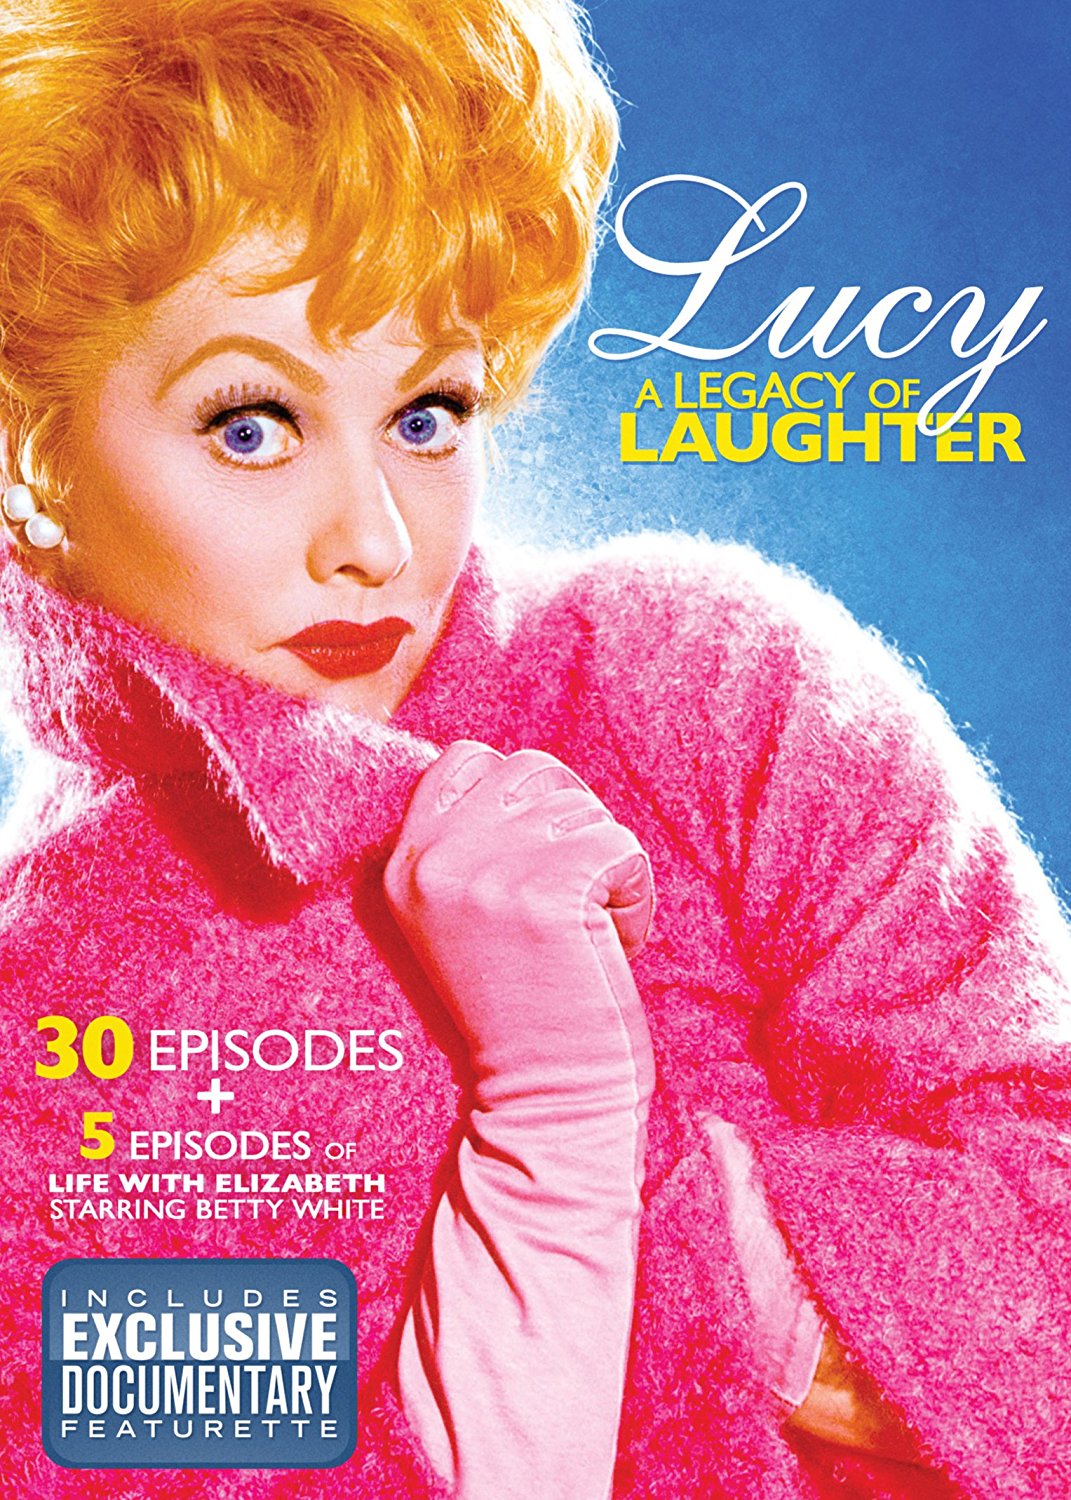 Lucy: A Legacy Of Laughter (DVD Set) - DVD [ 2018 ]  - Comedy Television On DVD - TV Shows On GRUV